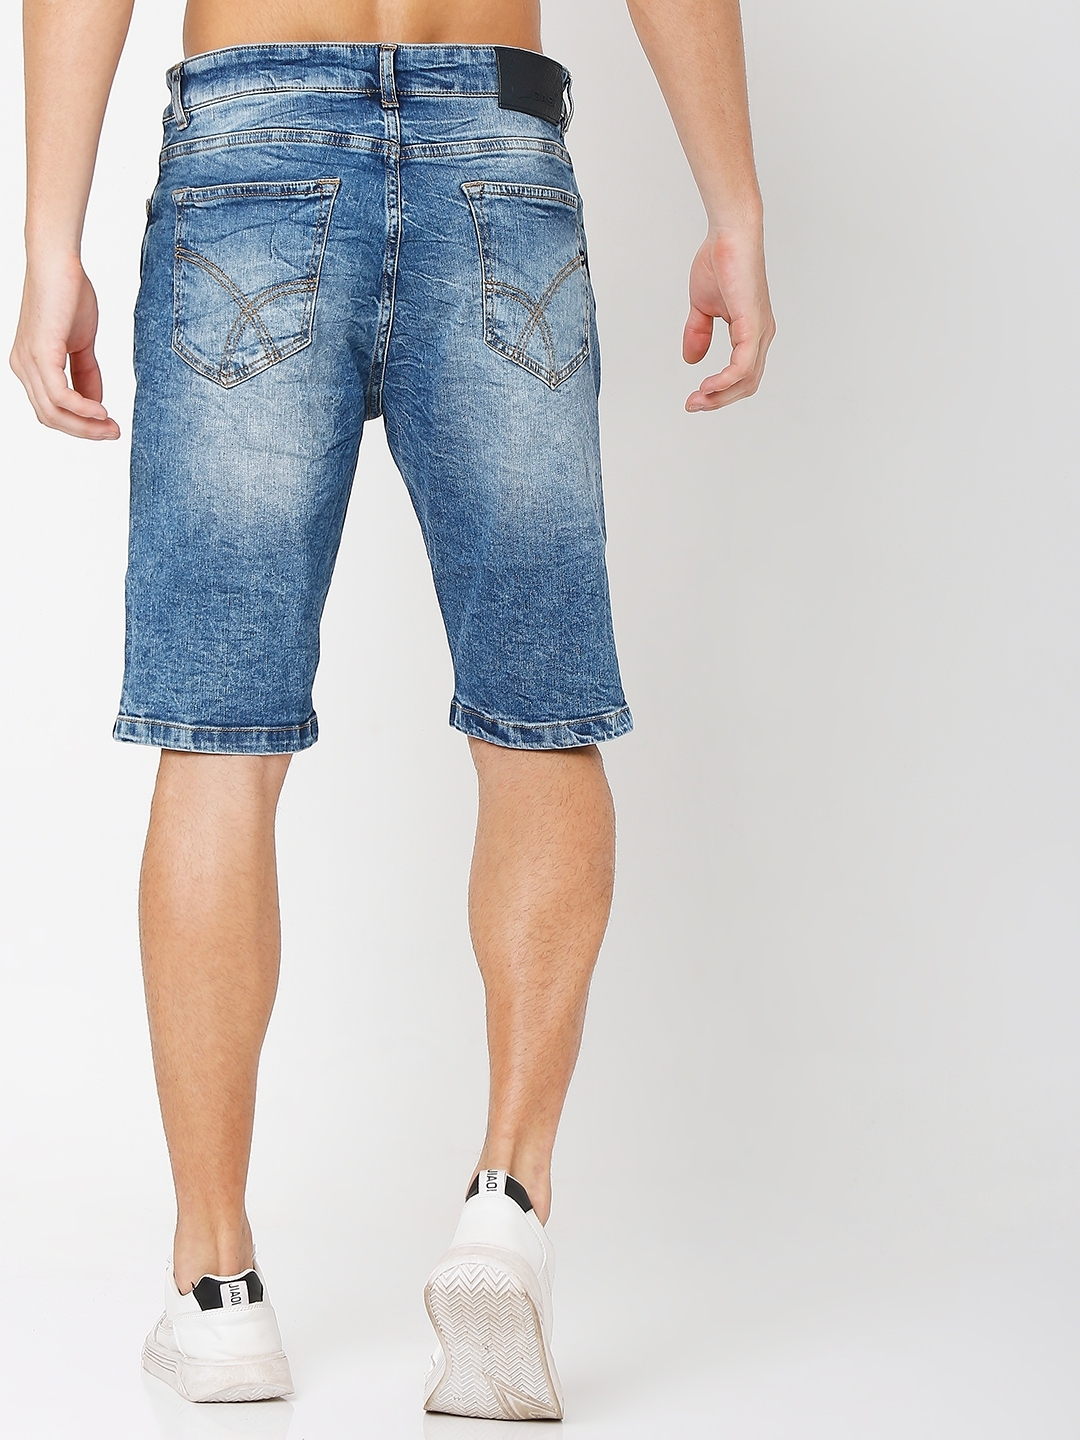 The Best Denim Shorts for Men Are a Lot Cooler Than You Remember | GQ